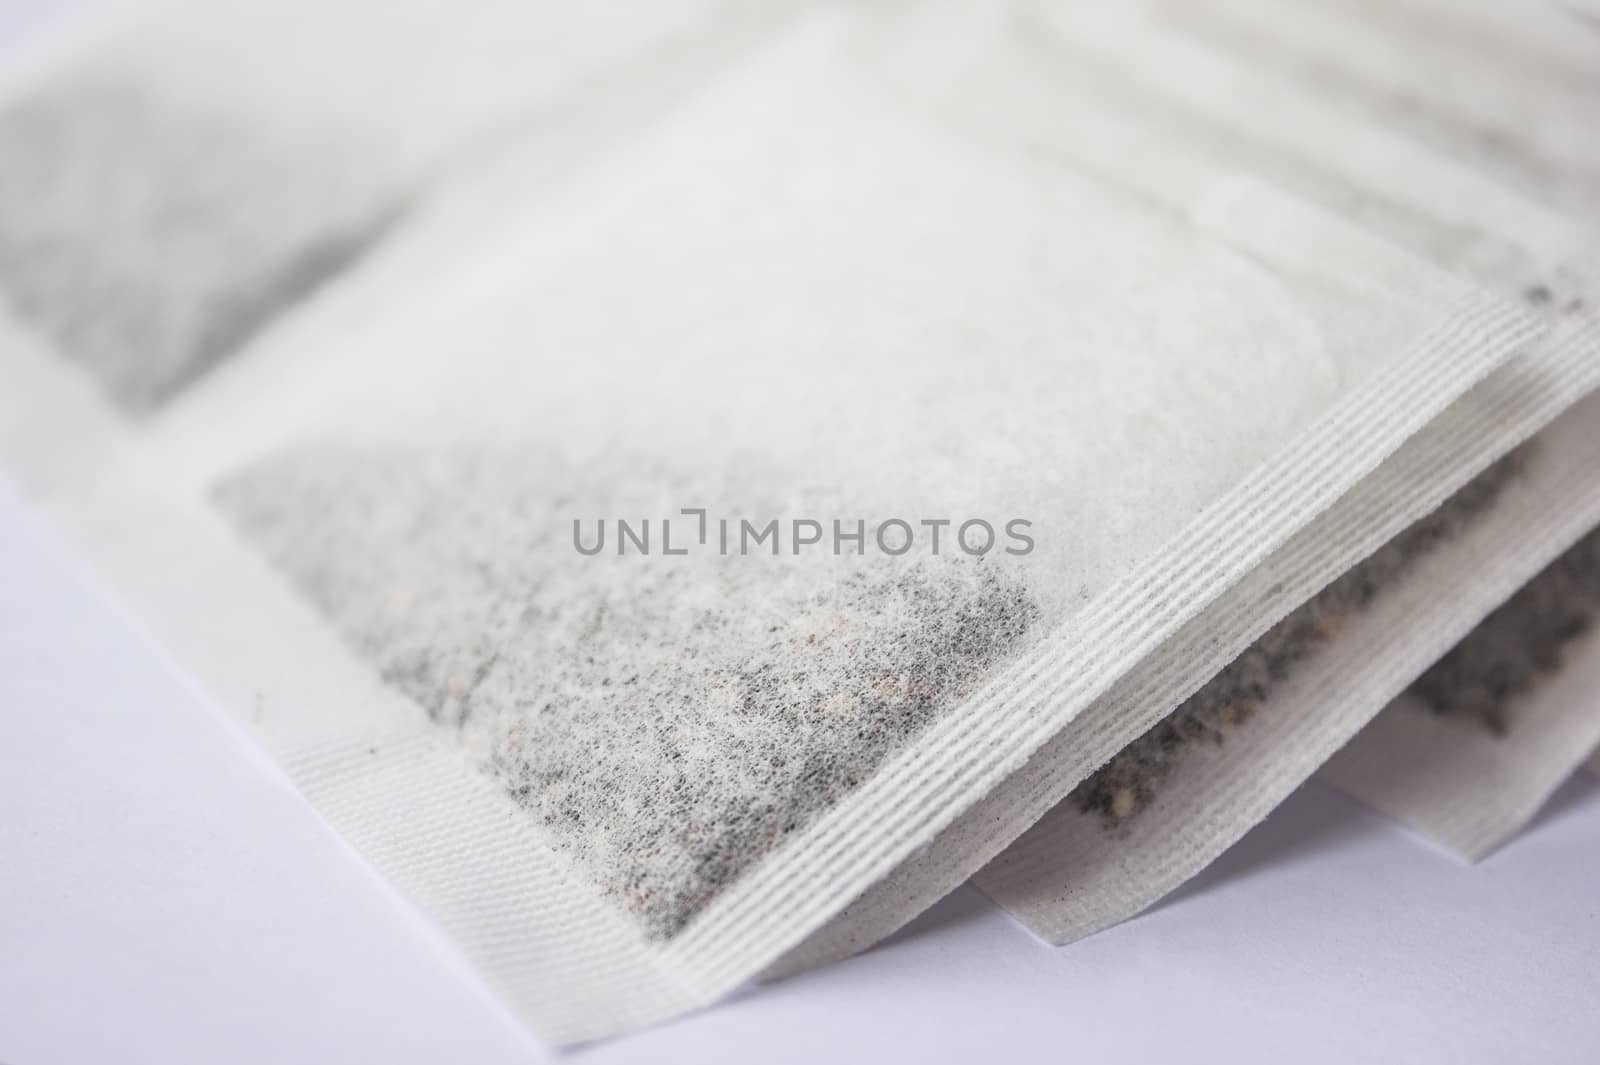 Multiple tea bags lying around on a white background.